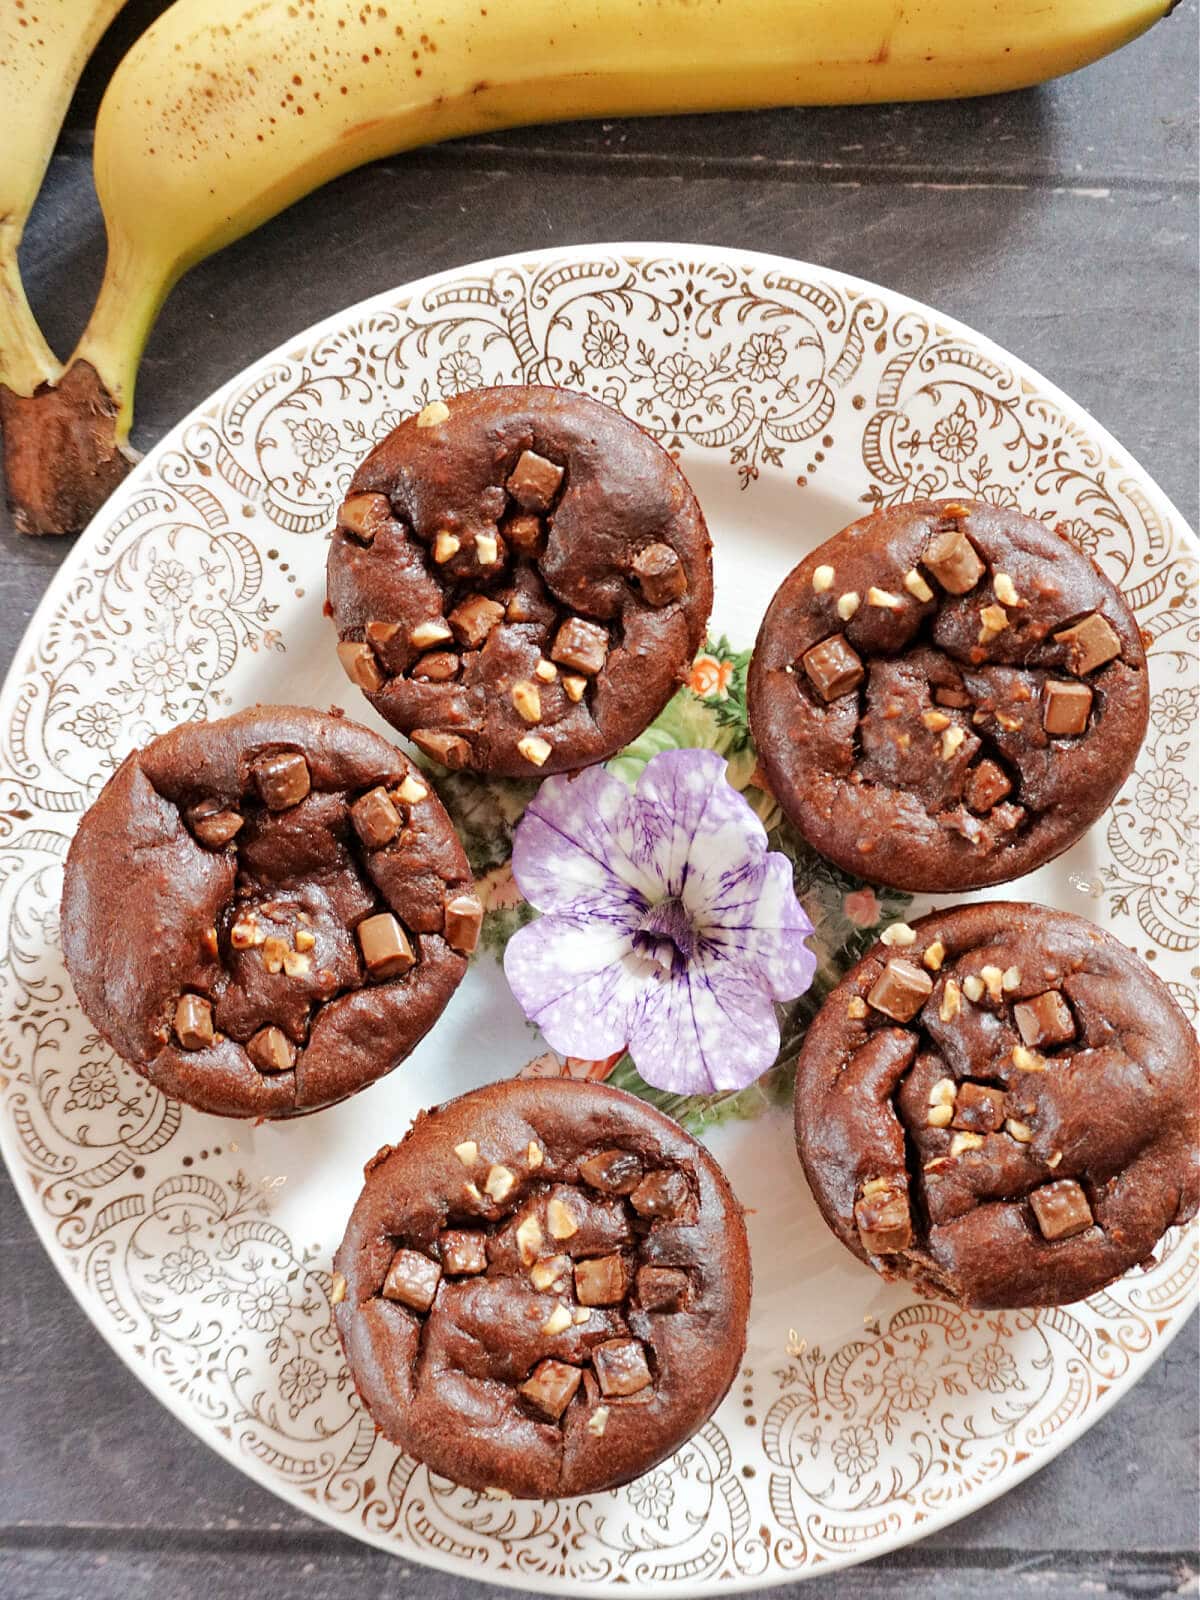 Overhead shot of a plate with 5 round brownies and a flower in the middle of the plate.